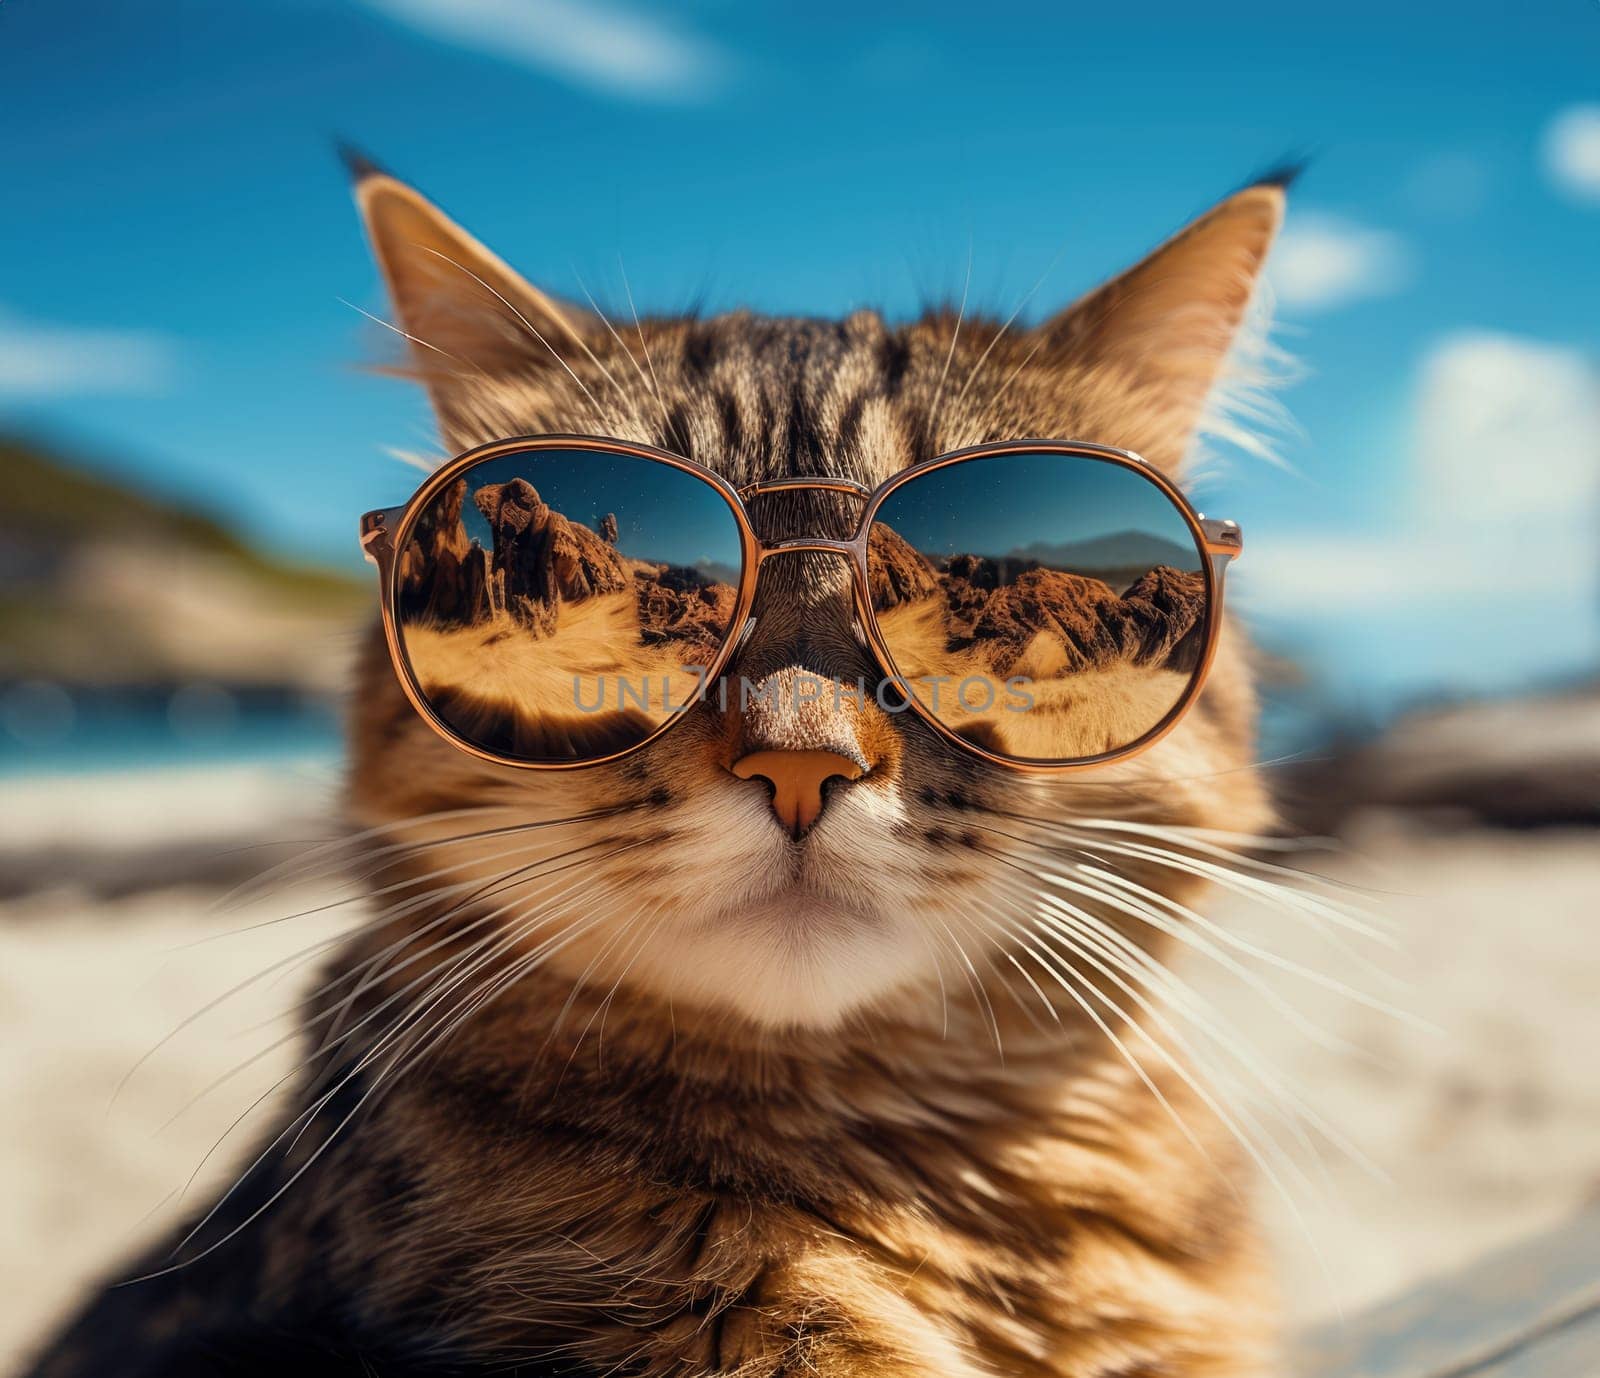 Cat with sunglasses at seaside resort  by palinchak